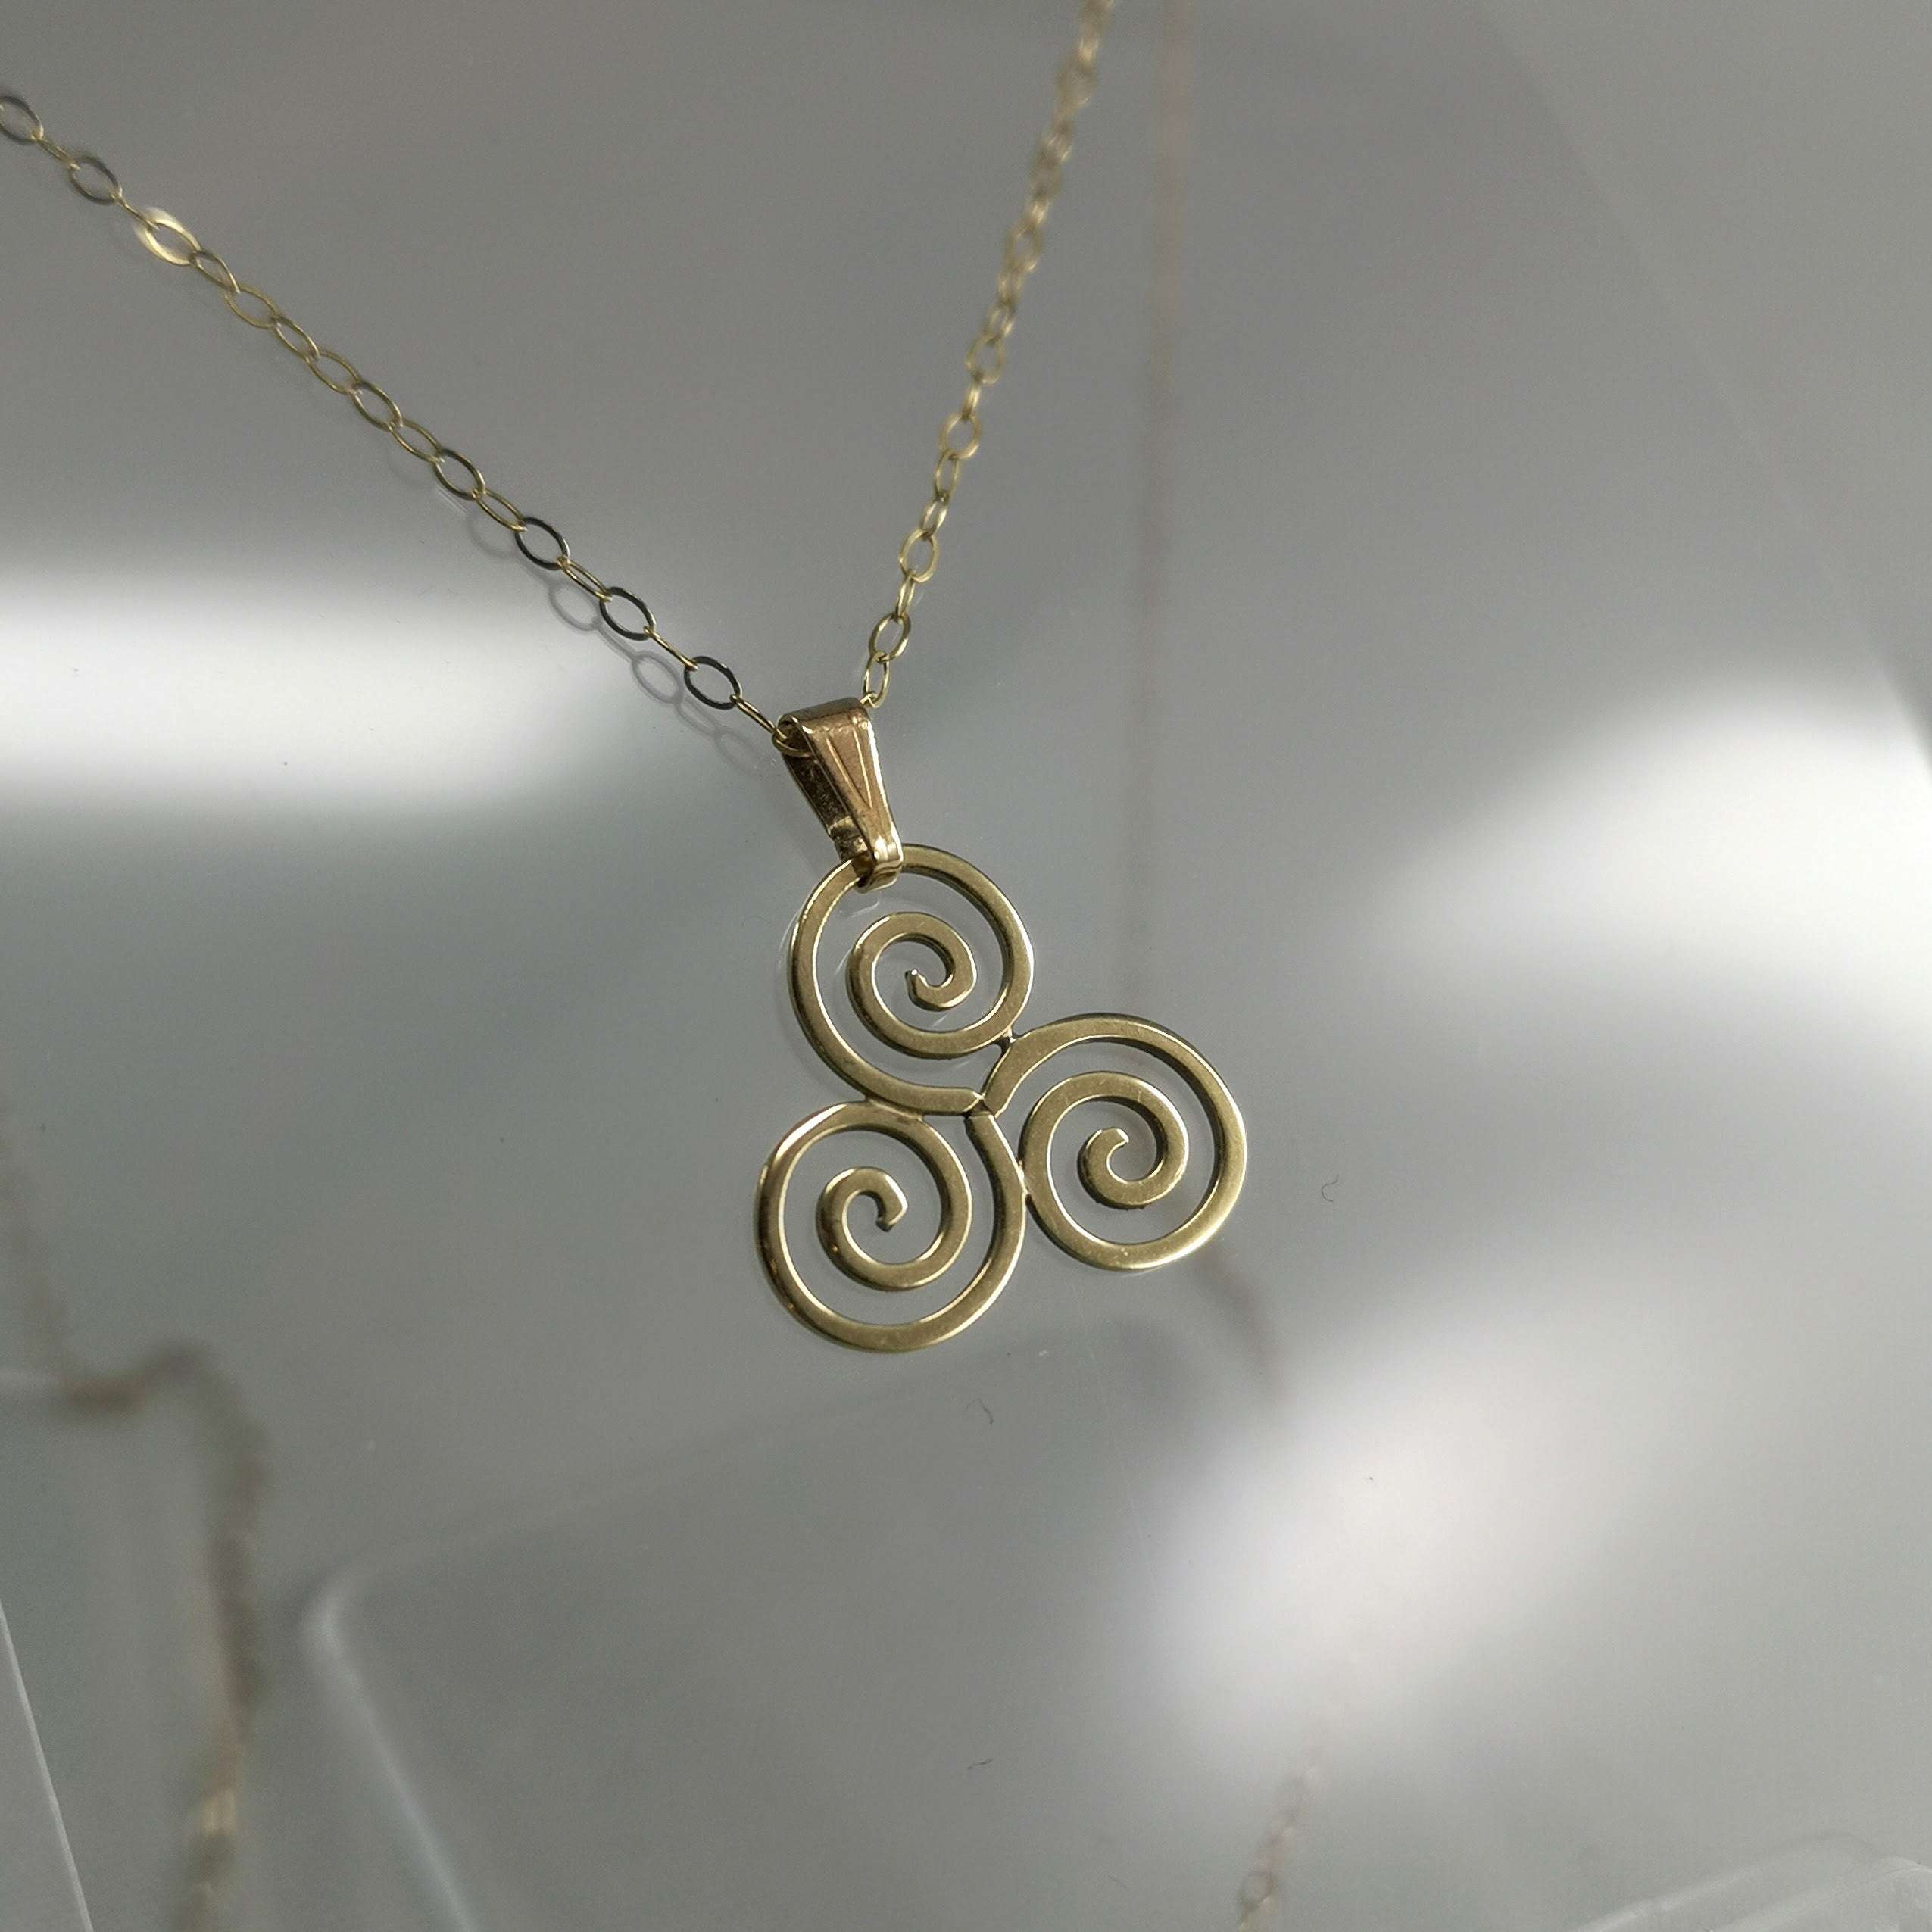 9ct Gold celtic spiral pendant with 18" chain